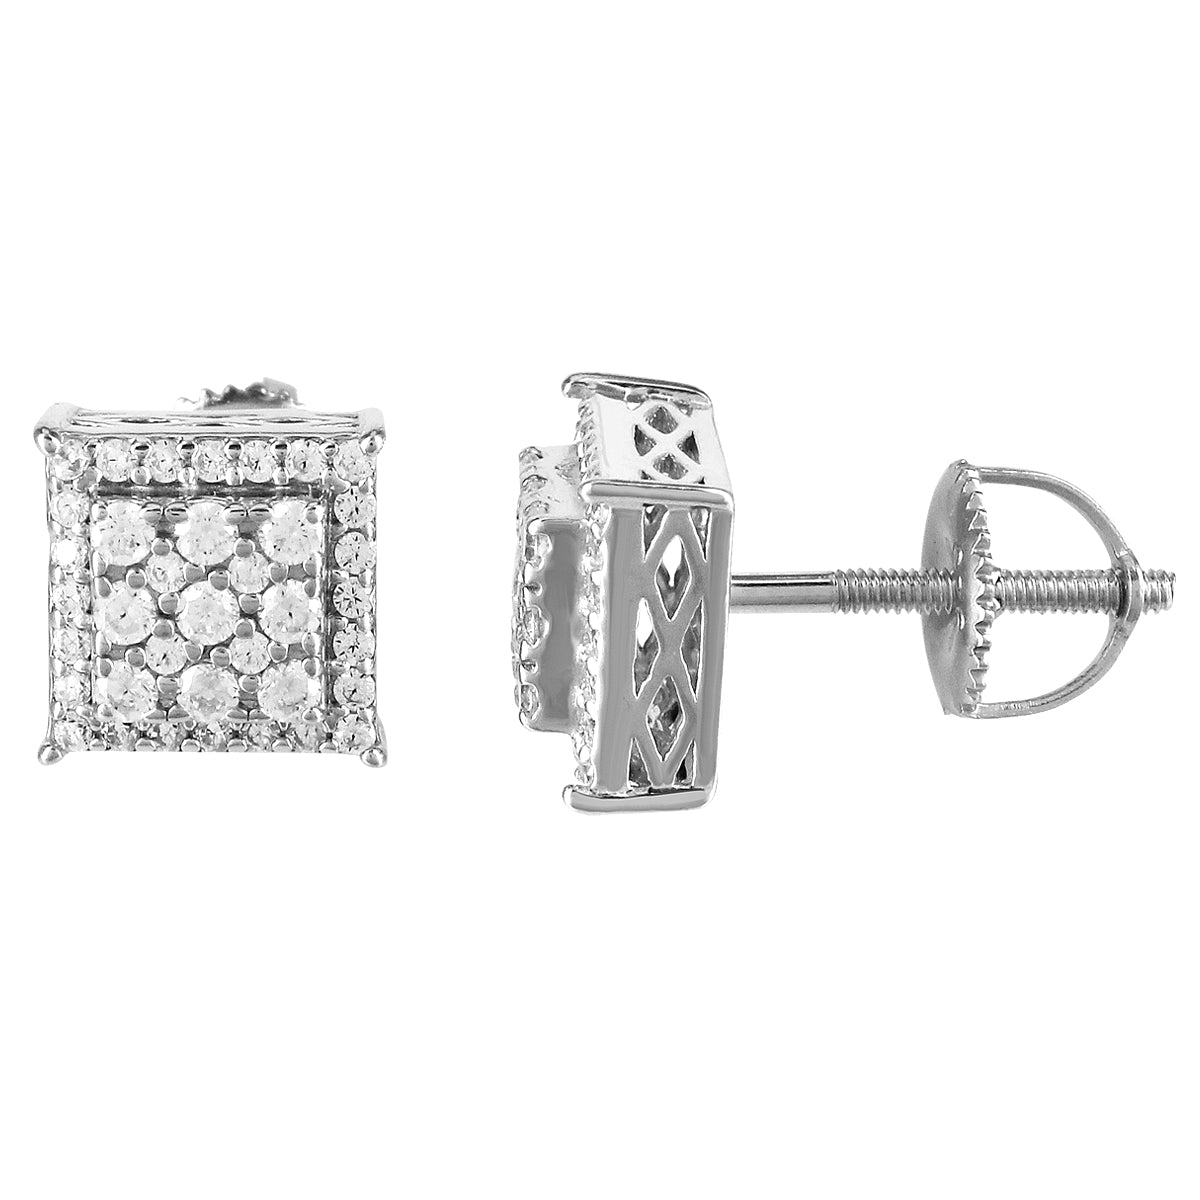 Sterling Silver Tower Style Cube Square Icy Screw Back Earrings